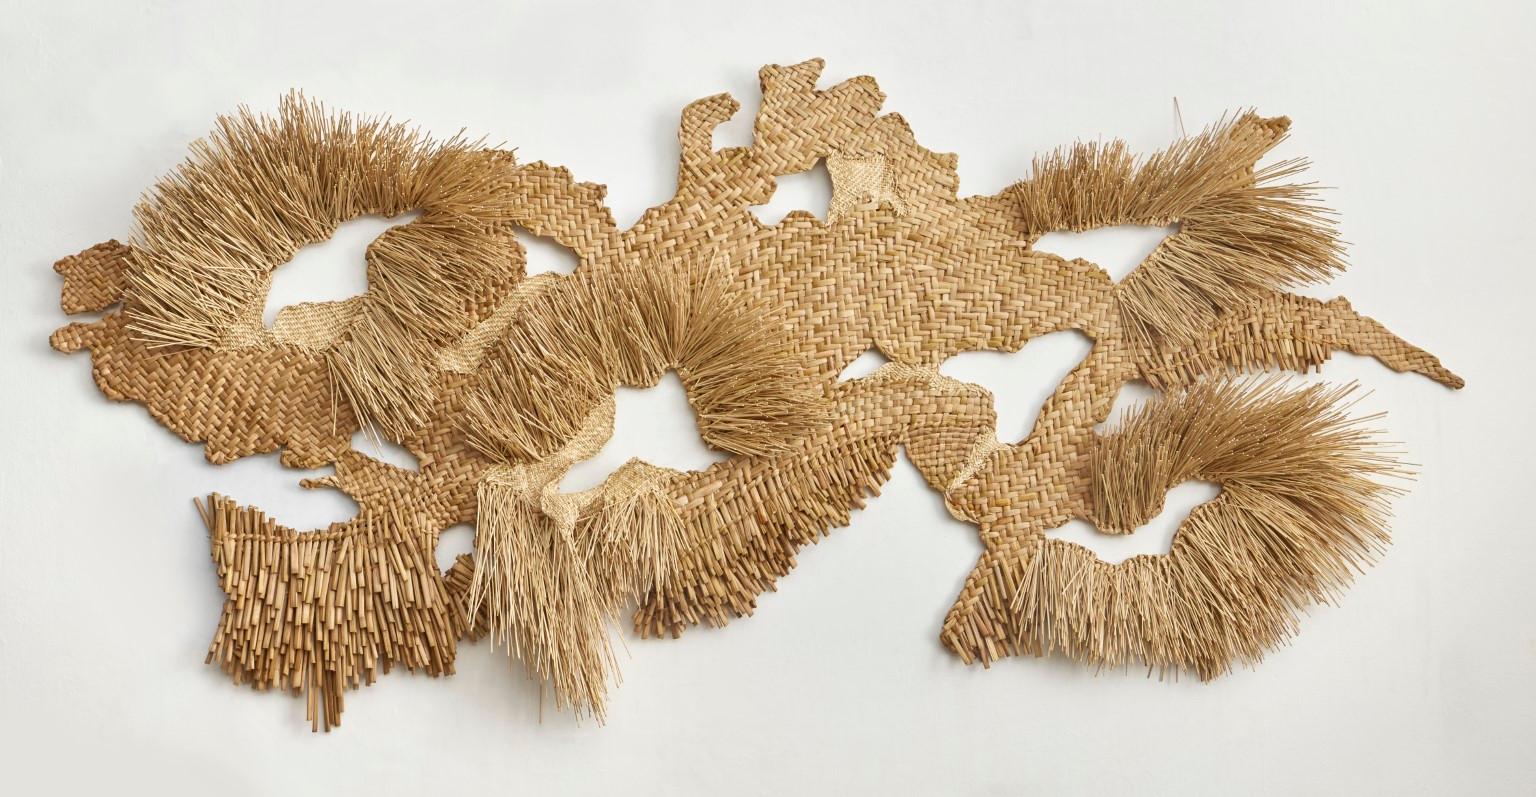 Wetland rug by Estudio Raffreyre
Dimensions: W 500 x 800 cm
Materials: Hanging Fibers

ESTUDIO RF is located in Lima, Peru. We are dedicated to the research of the contemporary habitat and natural environments in the Peruvian context, seeking to